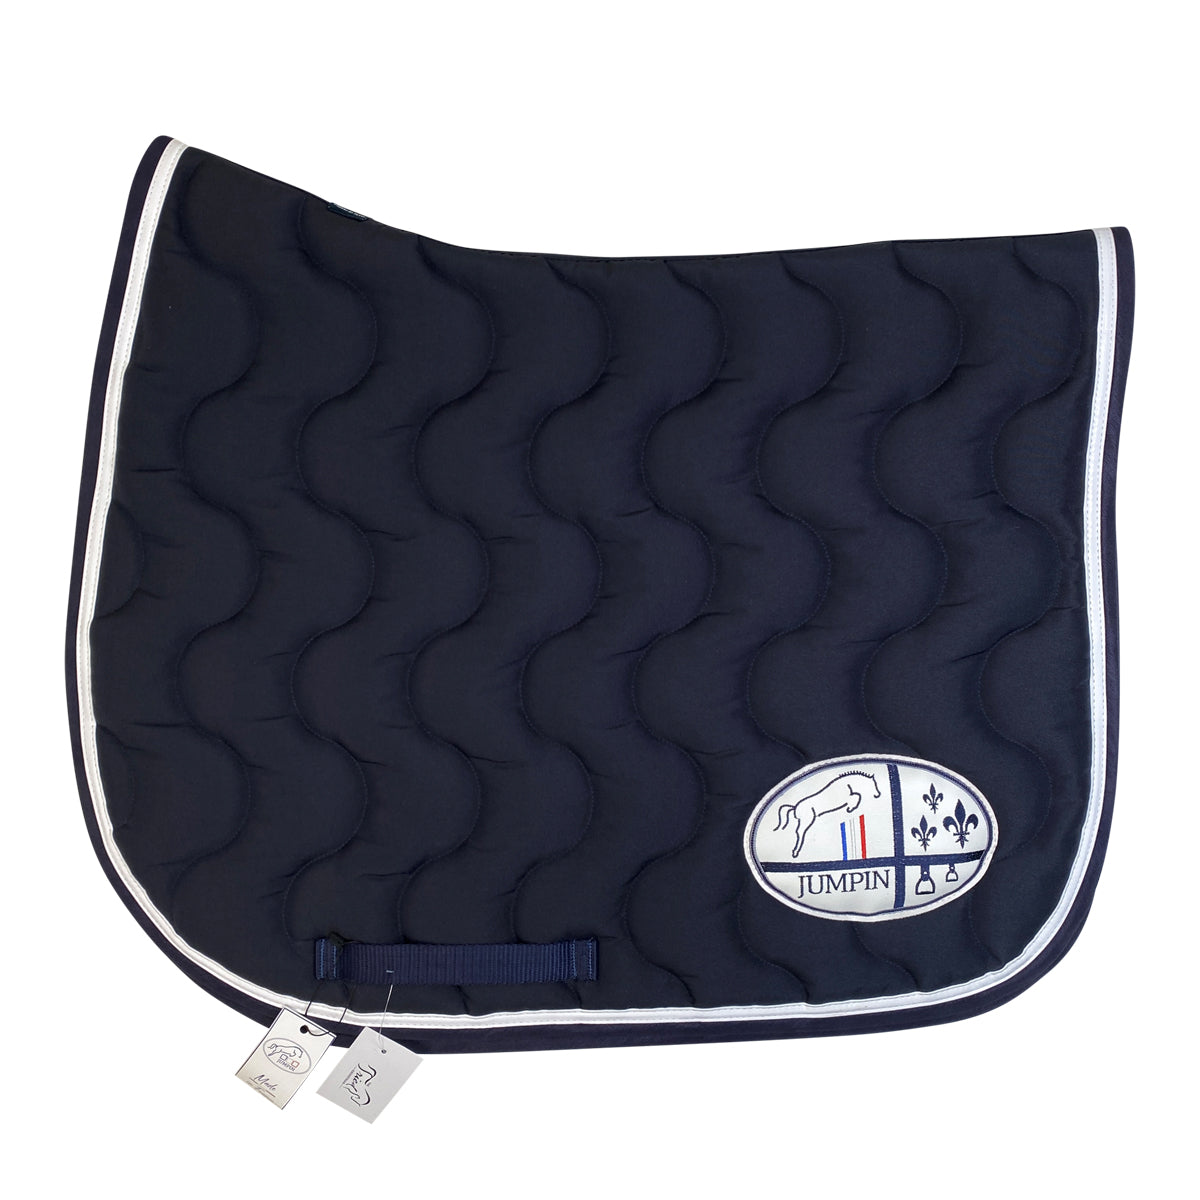 Jump'In 'Écusson' Saddle Pad in Navy